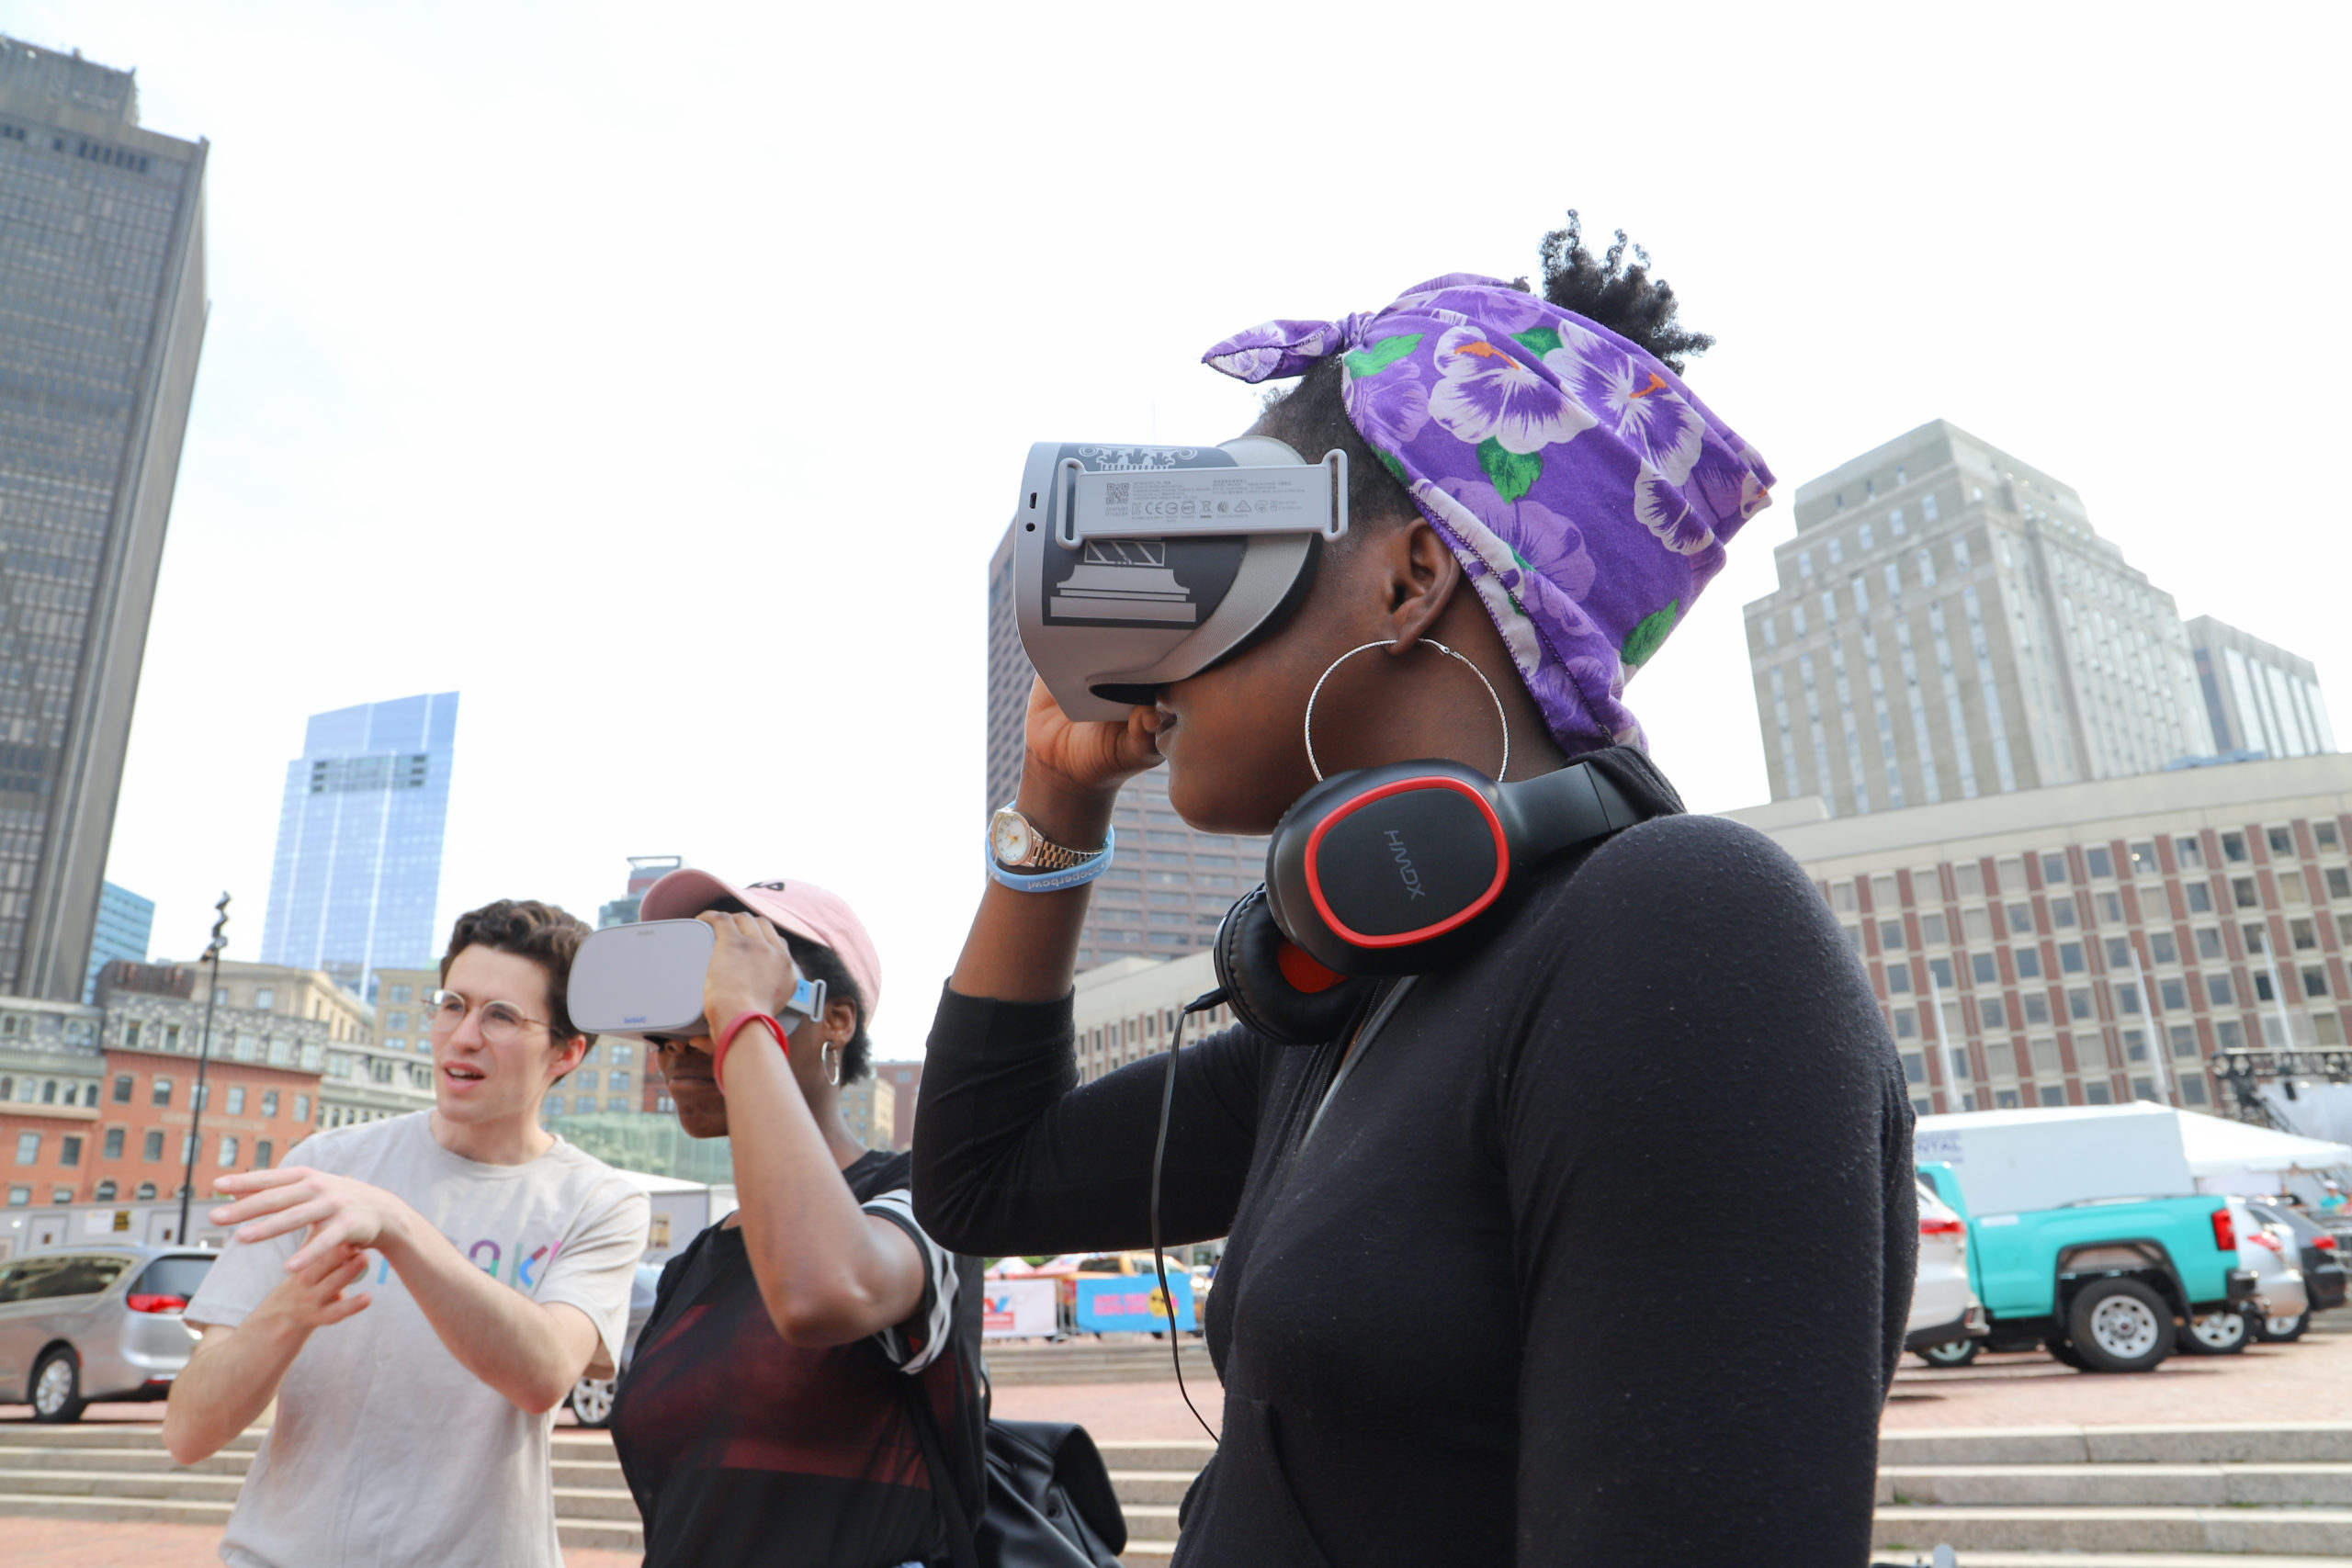 Woman looking through VR goggles with two people behind her also looking through VR goggles